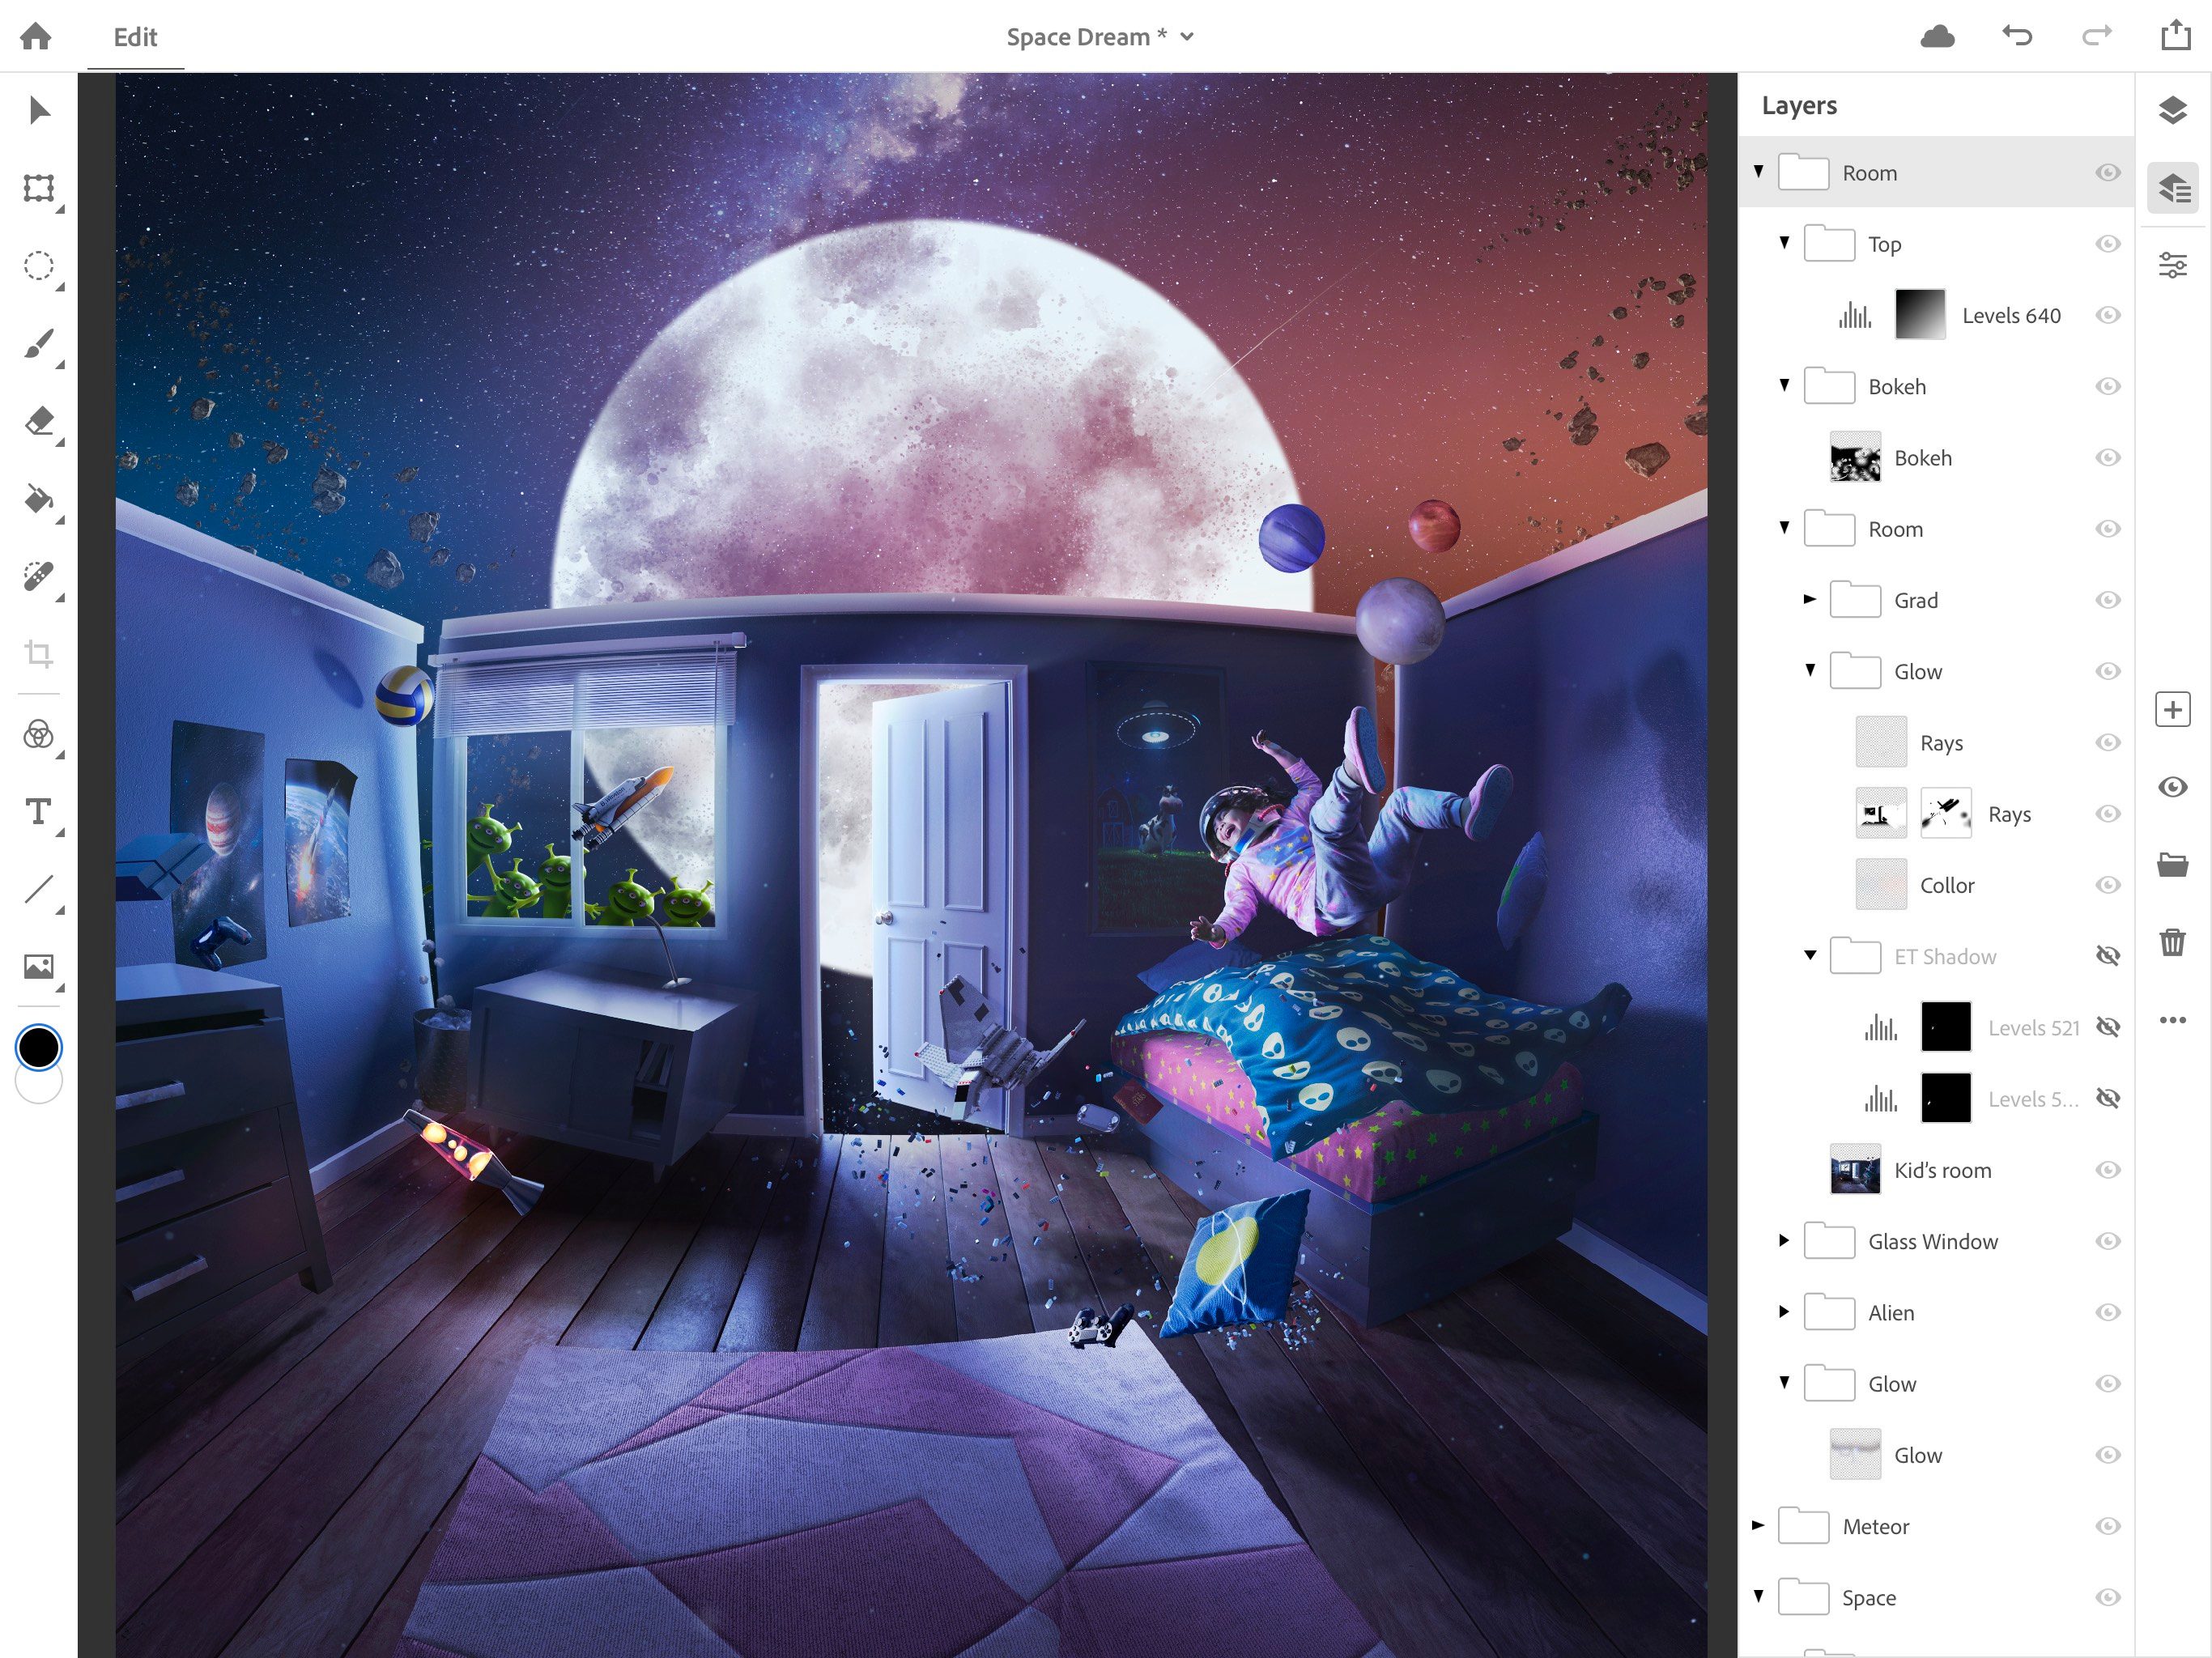 Adobe Announces Full Photoshop CC for iPad Shipping 2019, Syncs with Desktop